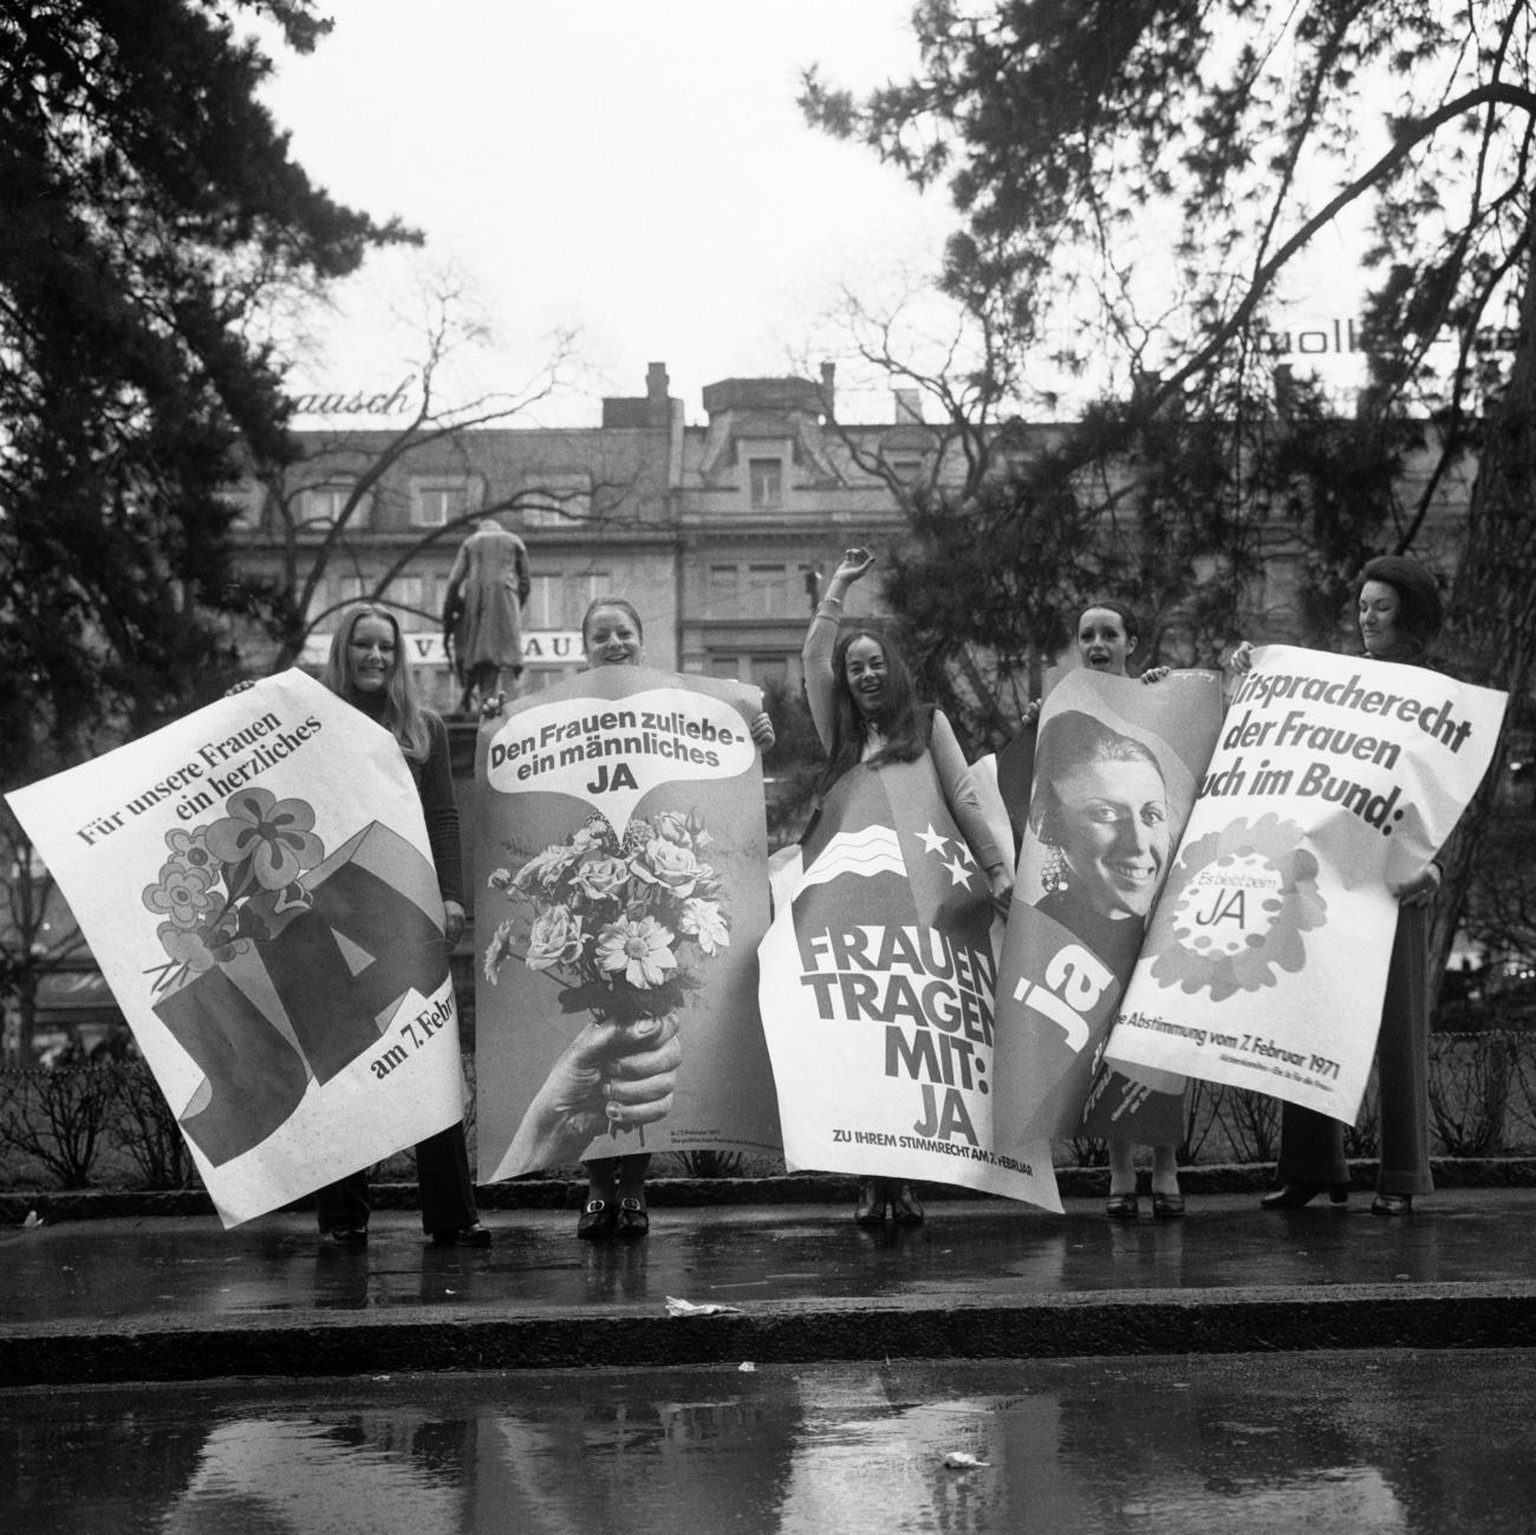 Supporters of the women&#039;s right to vote pose with posters in the run-up to the federal vote on February 7, 1971, pictured in Zurich, Switzerland, on January 26, 1971. (KEYSTONE/Str)

Befuerworter ...